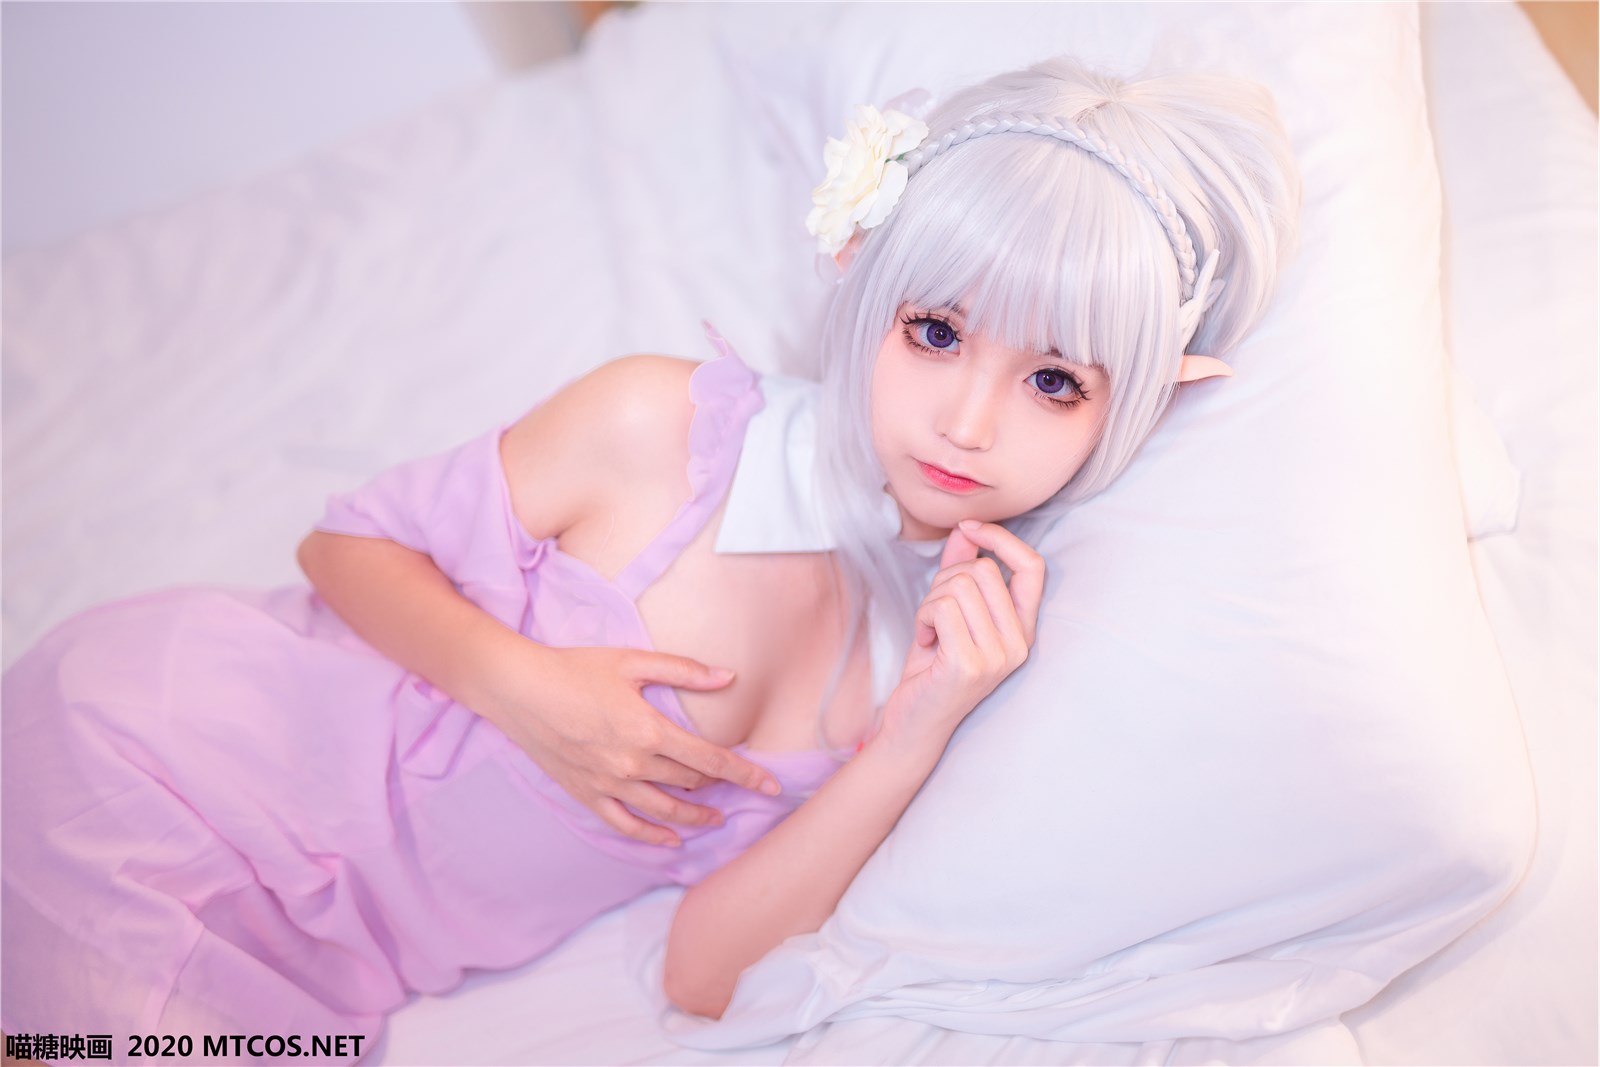 Meow candy picture Vol.118 foam off shoulder Nightgown(7)